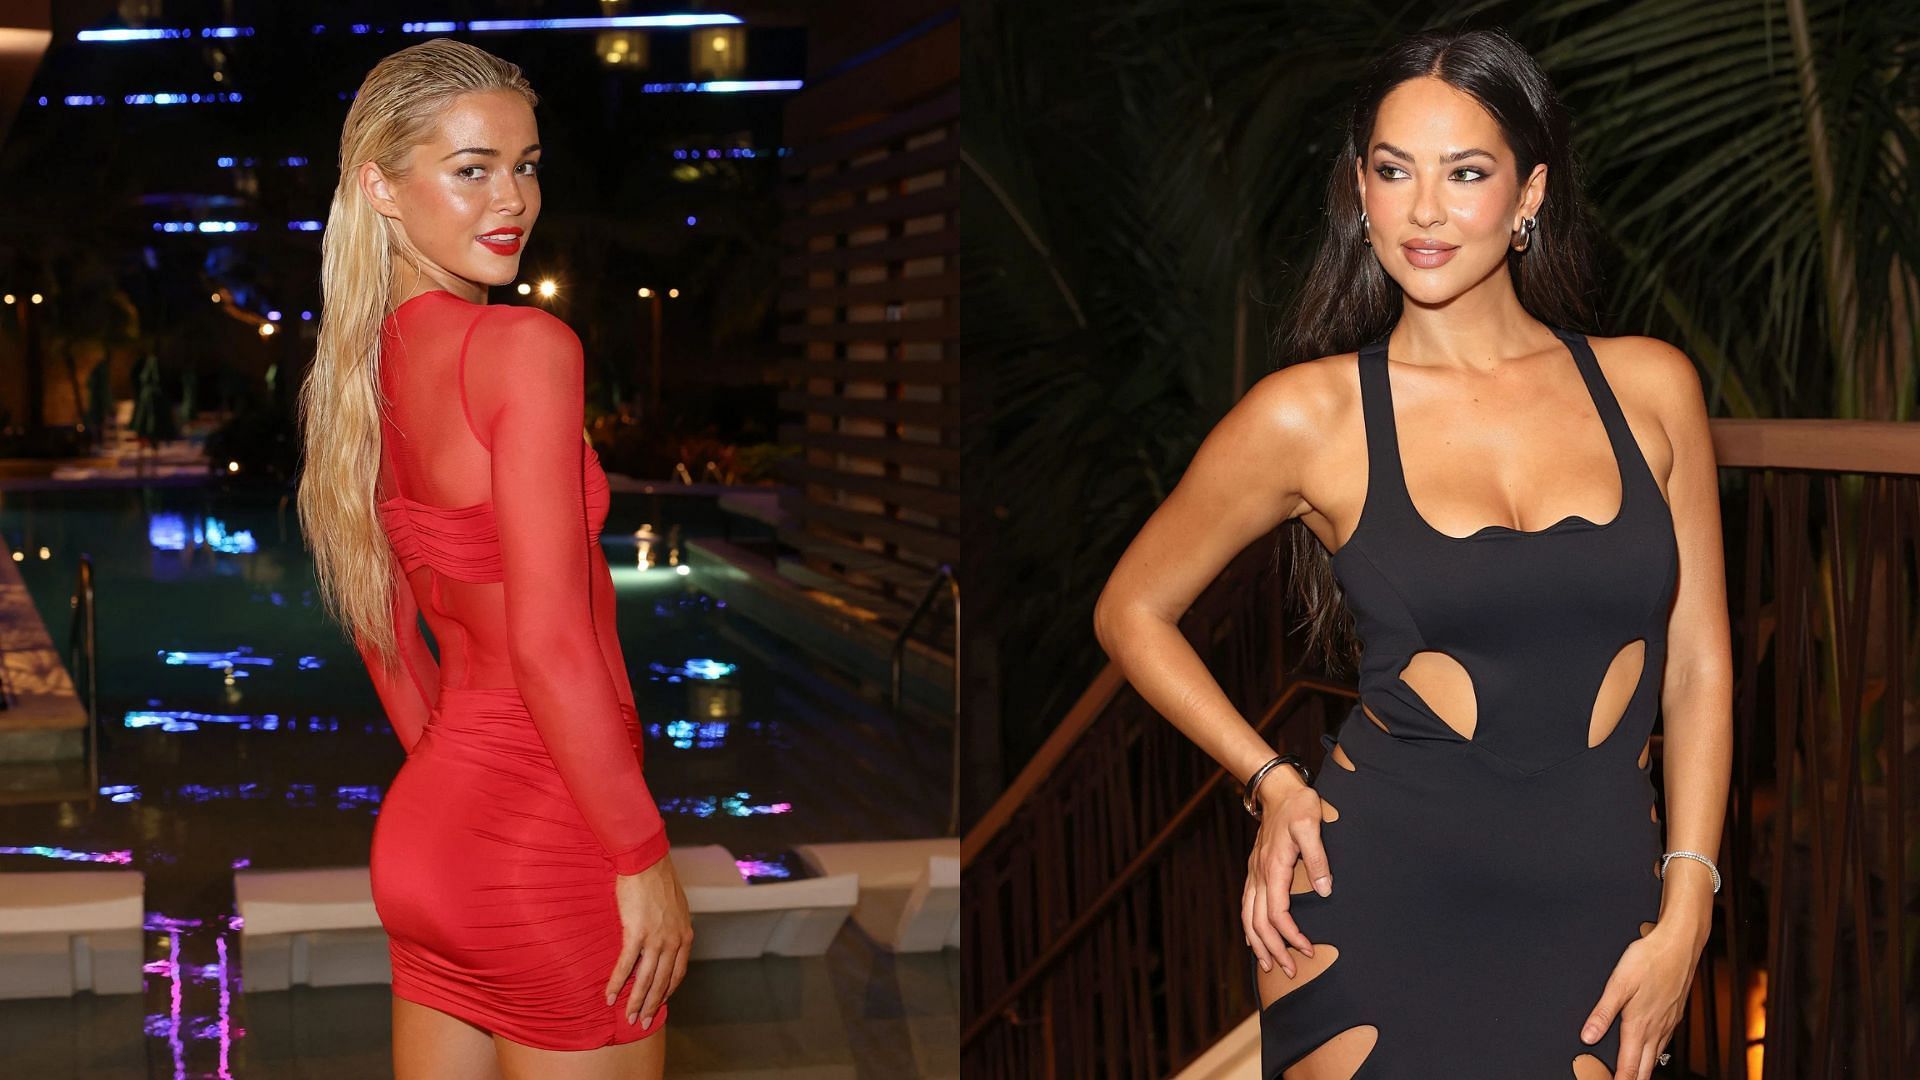 Olivia Dunne and Christen Harper at the SI Swim 60th Anniversary launch party